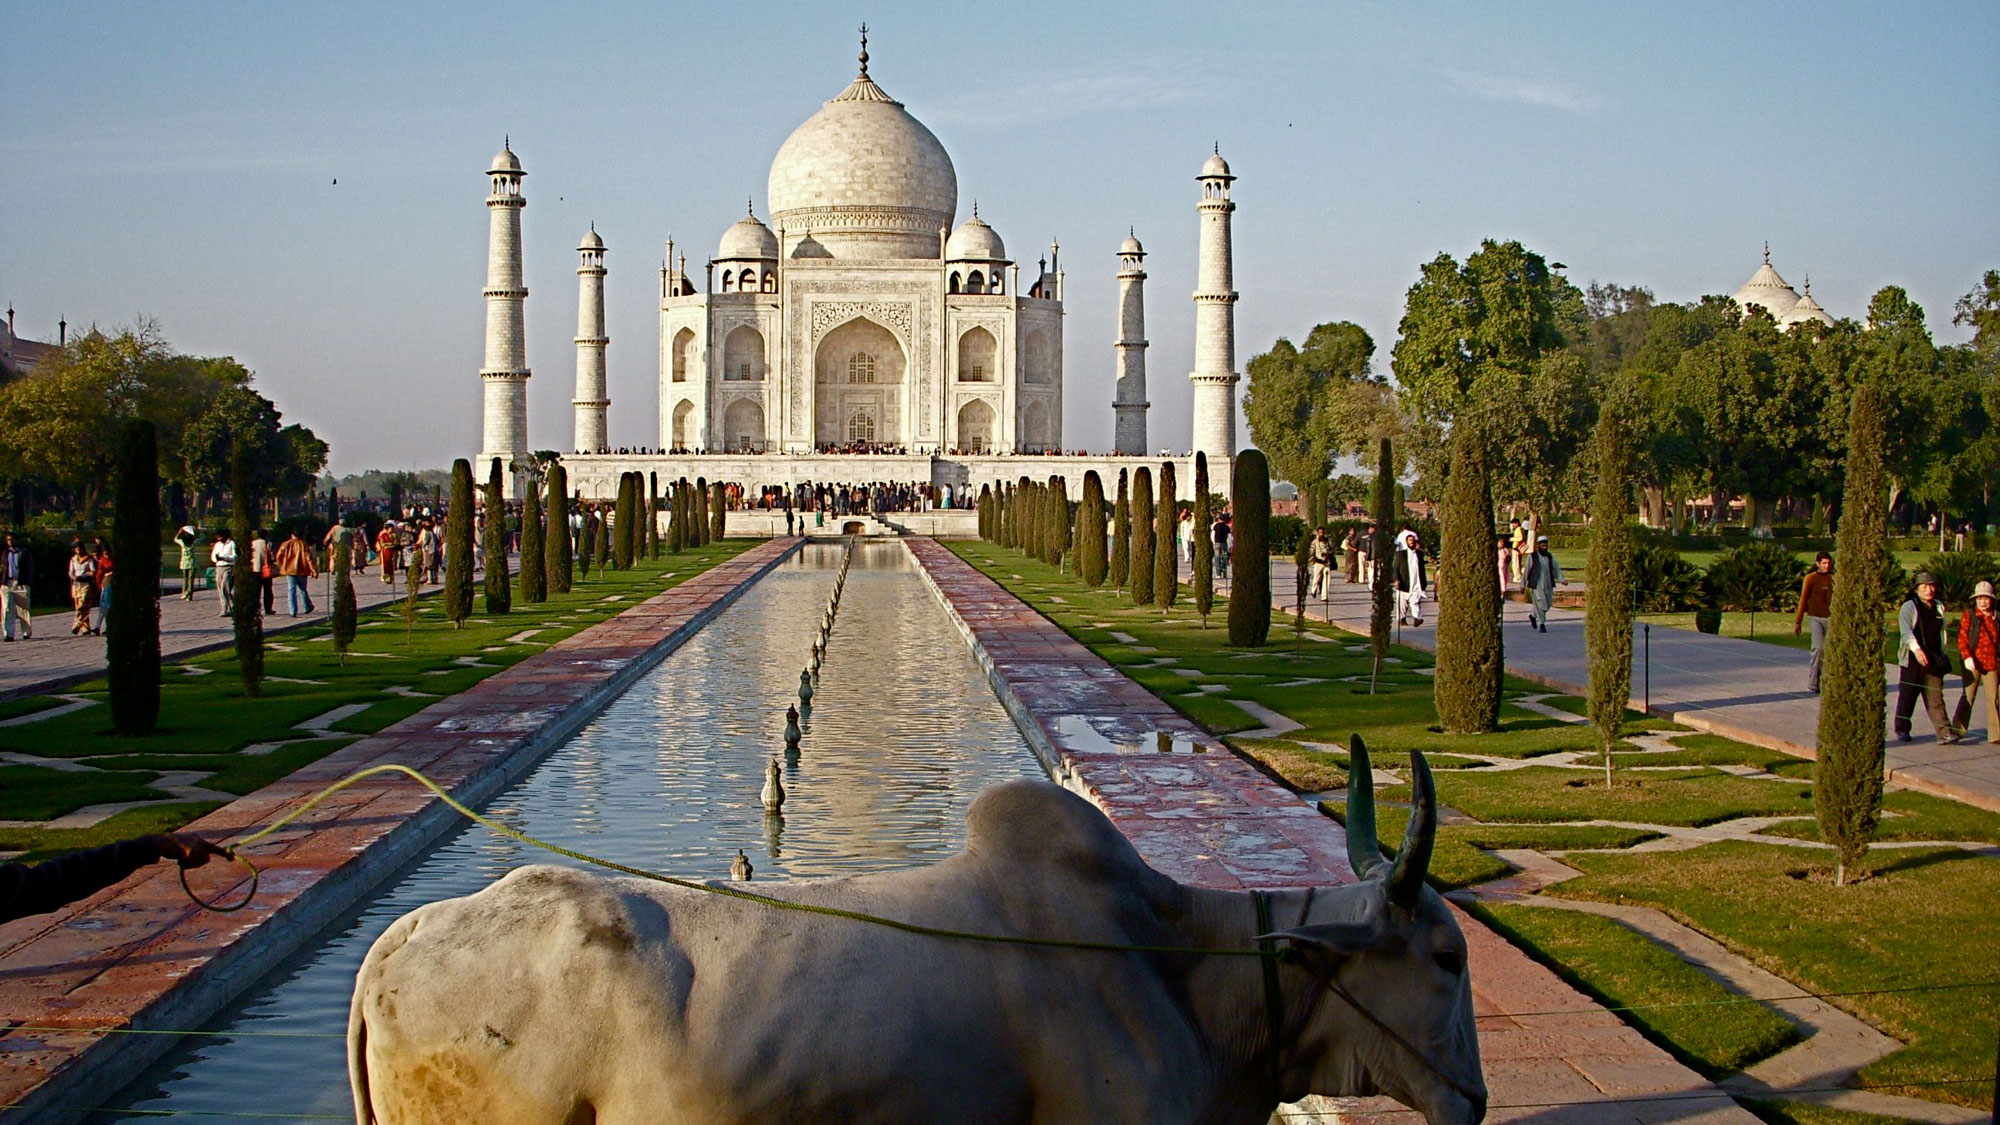 View of the Taj Mahal, with a cow walking in front of it